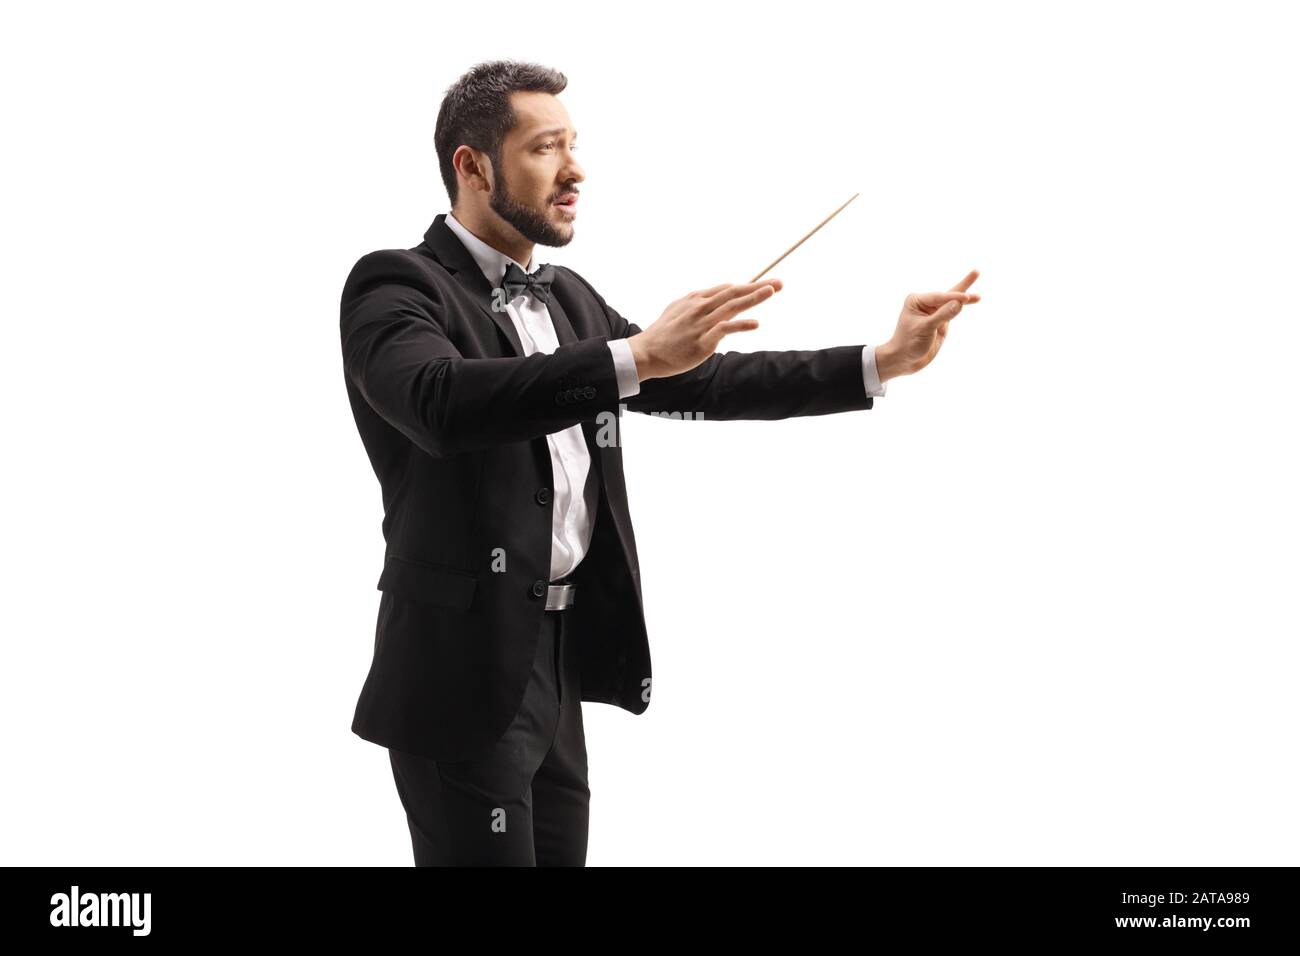 Male conductor in a suit conducting with a baton and gesturing with hand isolated on white background Stock Photo